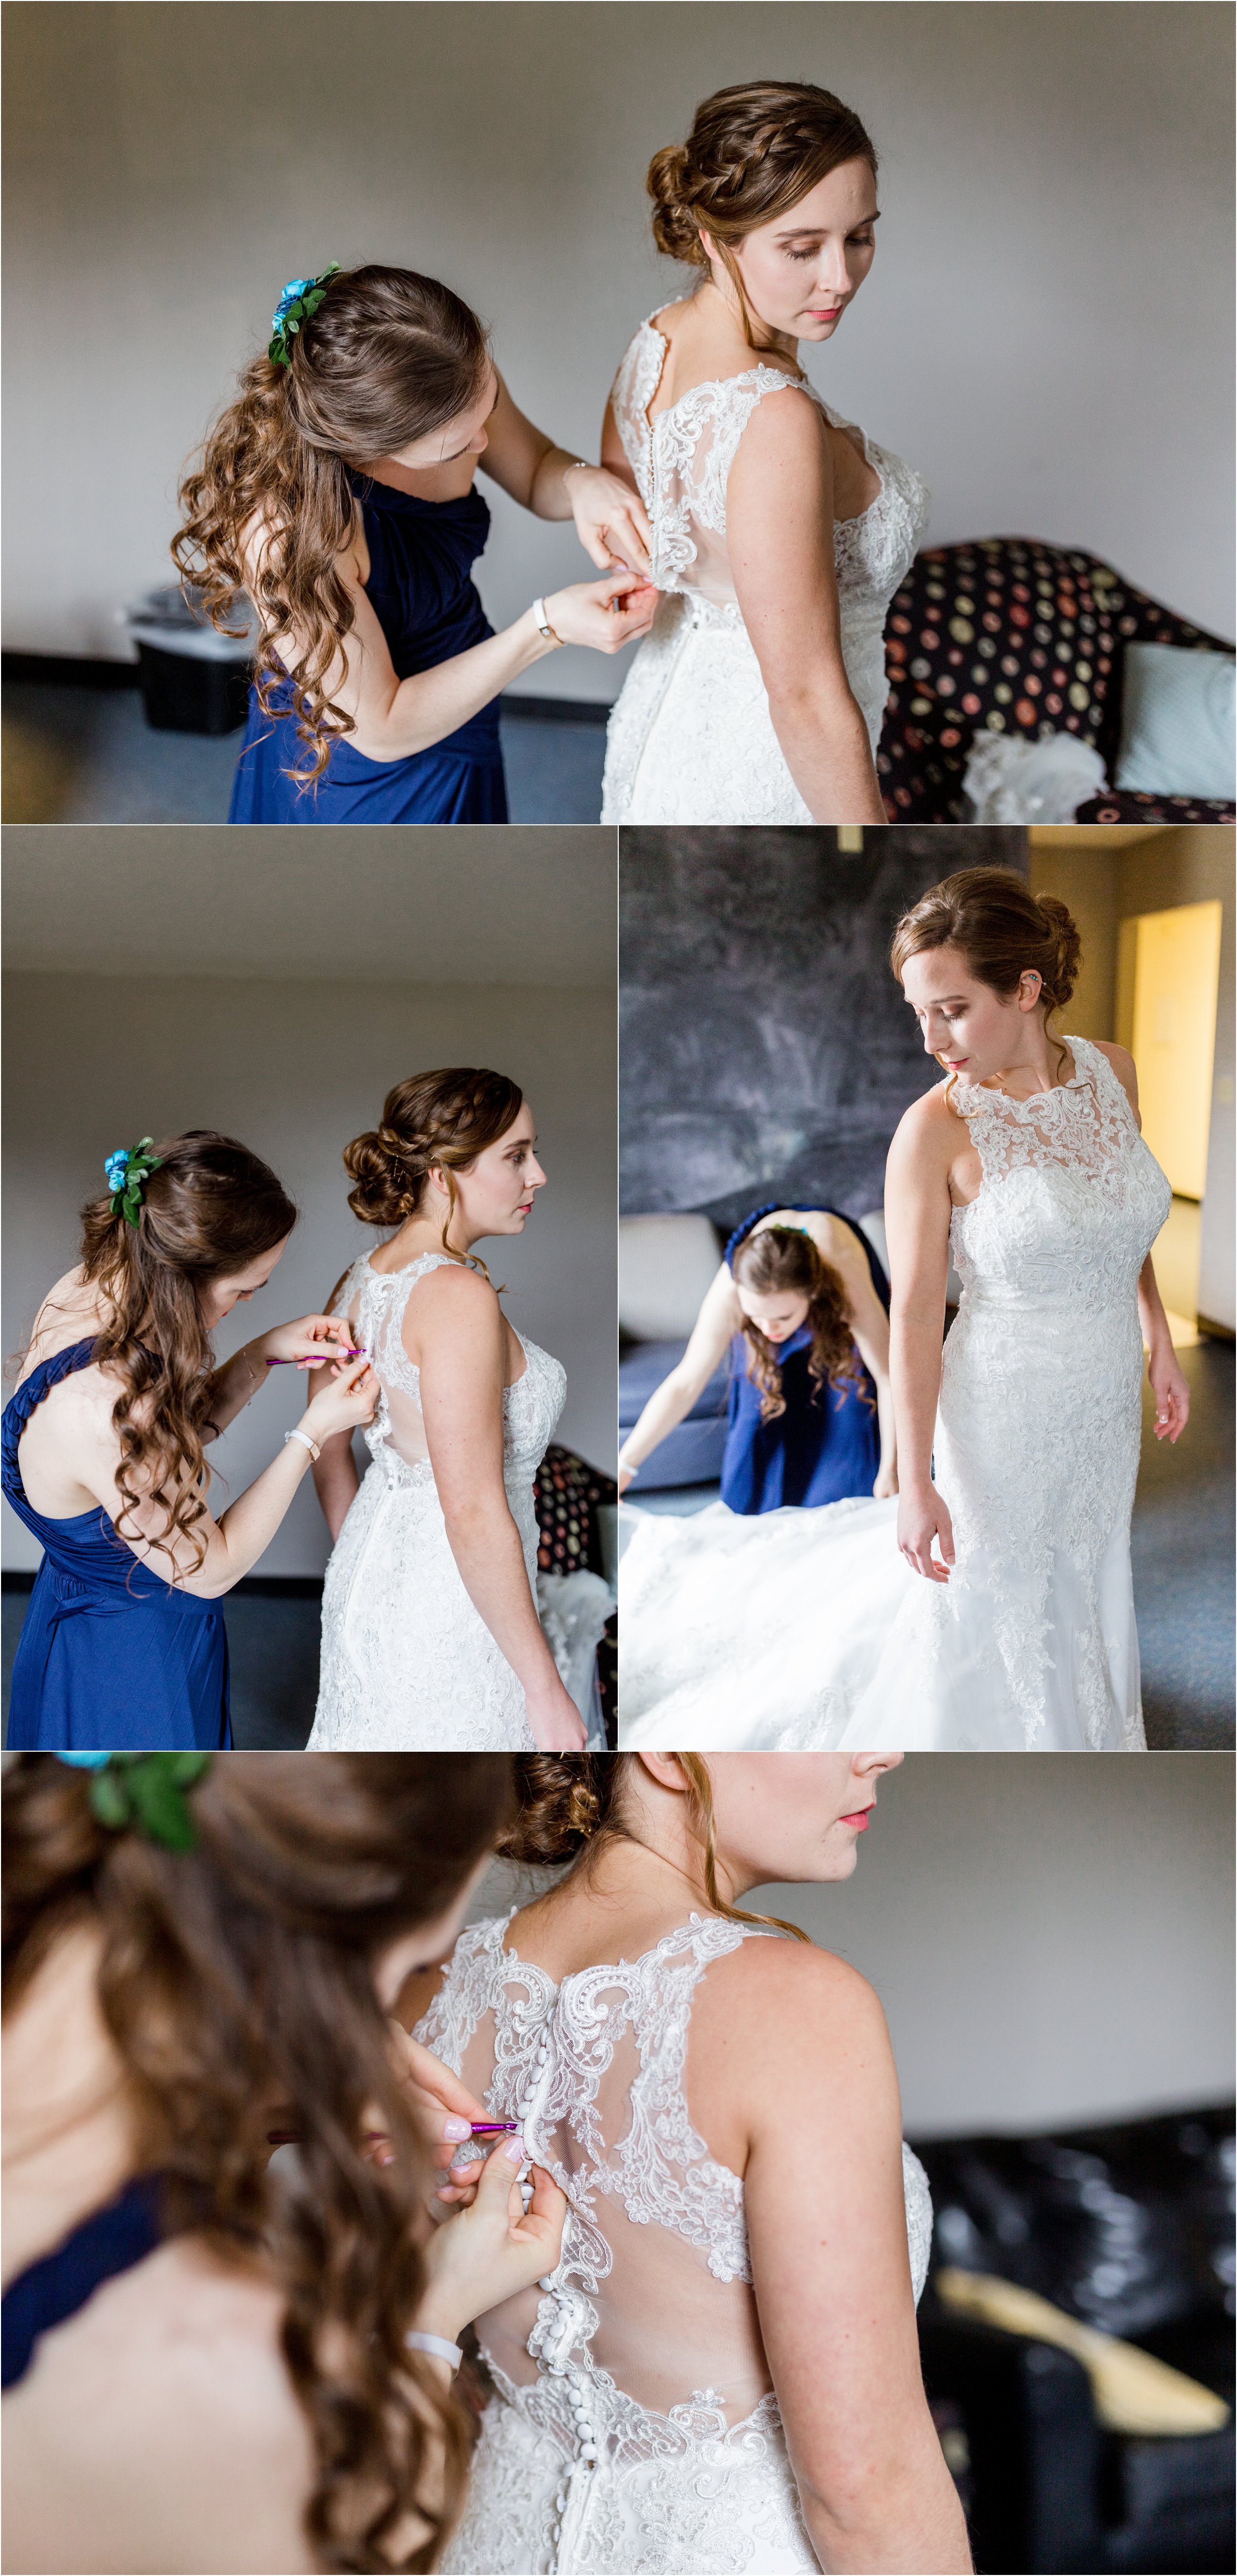 bride is helped into wedding dress by bridesmaids who button and her in and help with jewelry